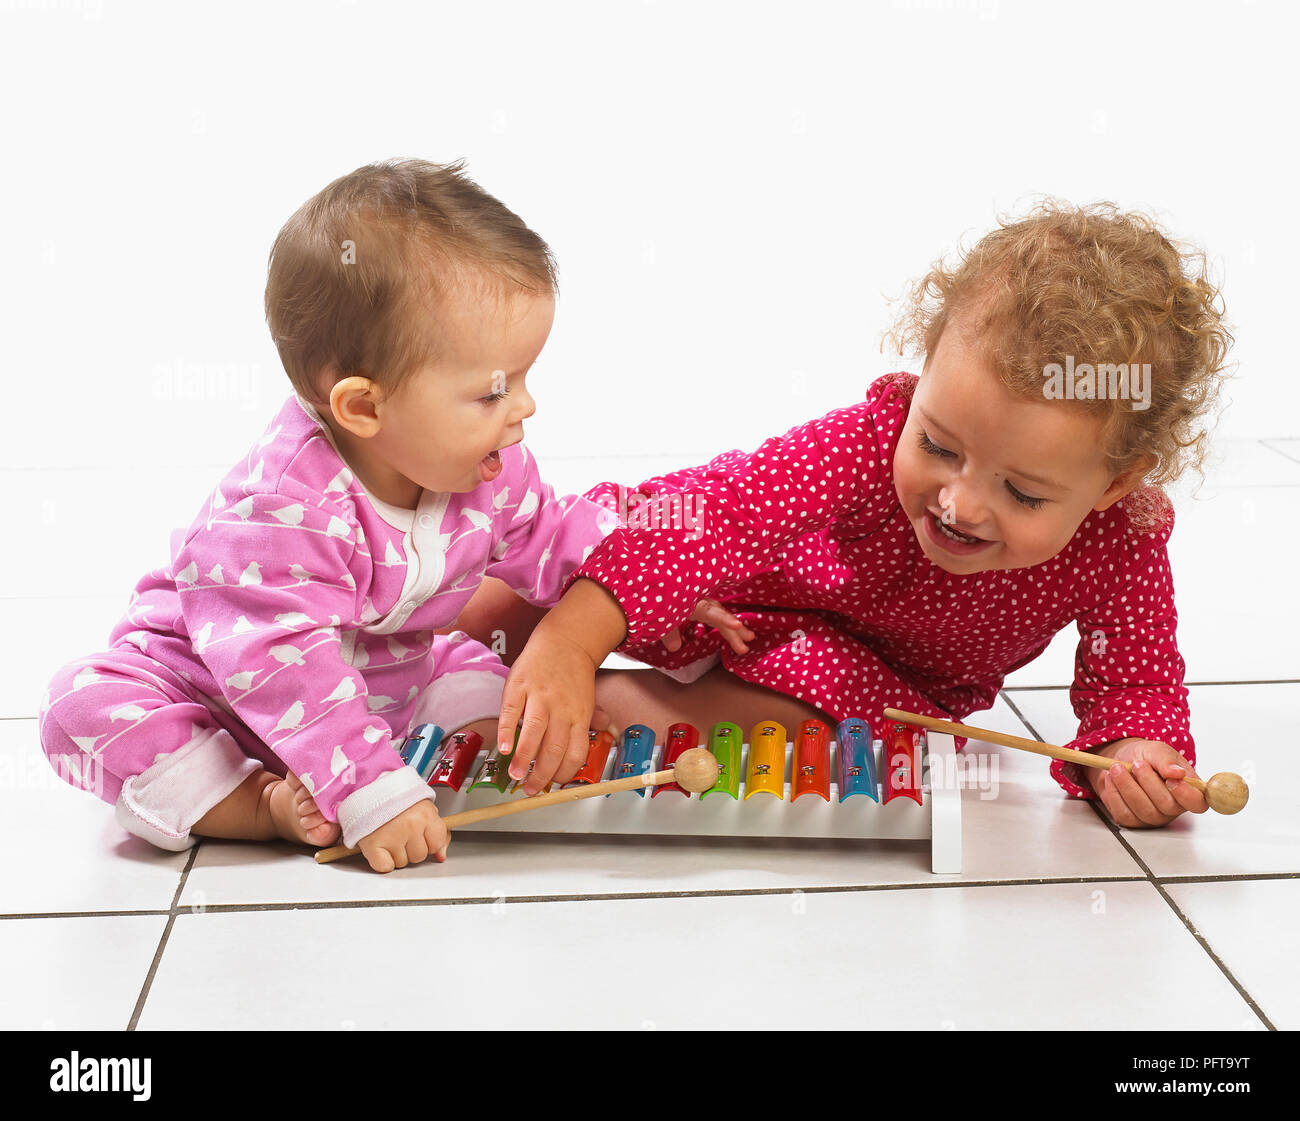 Small girl (2 years) and baby (8 months) kneeling on floor playing a xylophone Stock Photo